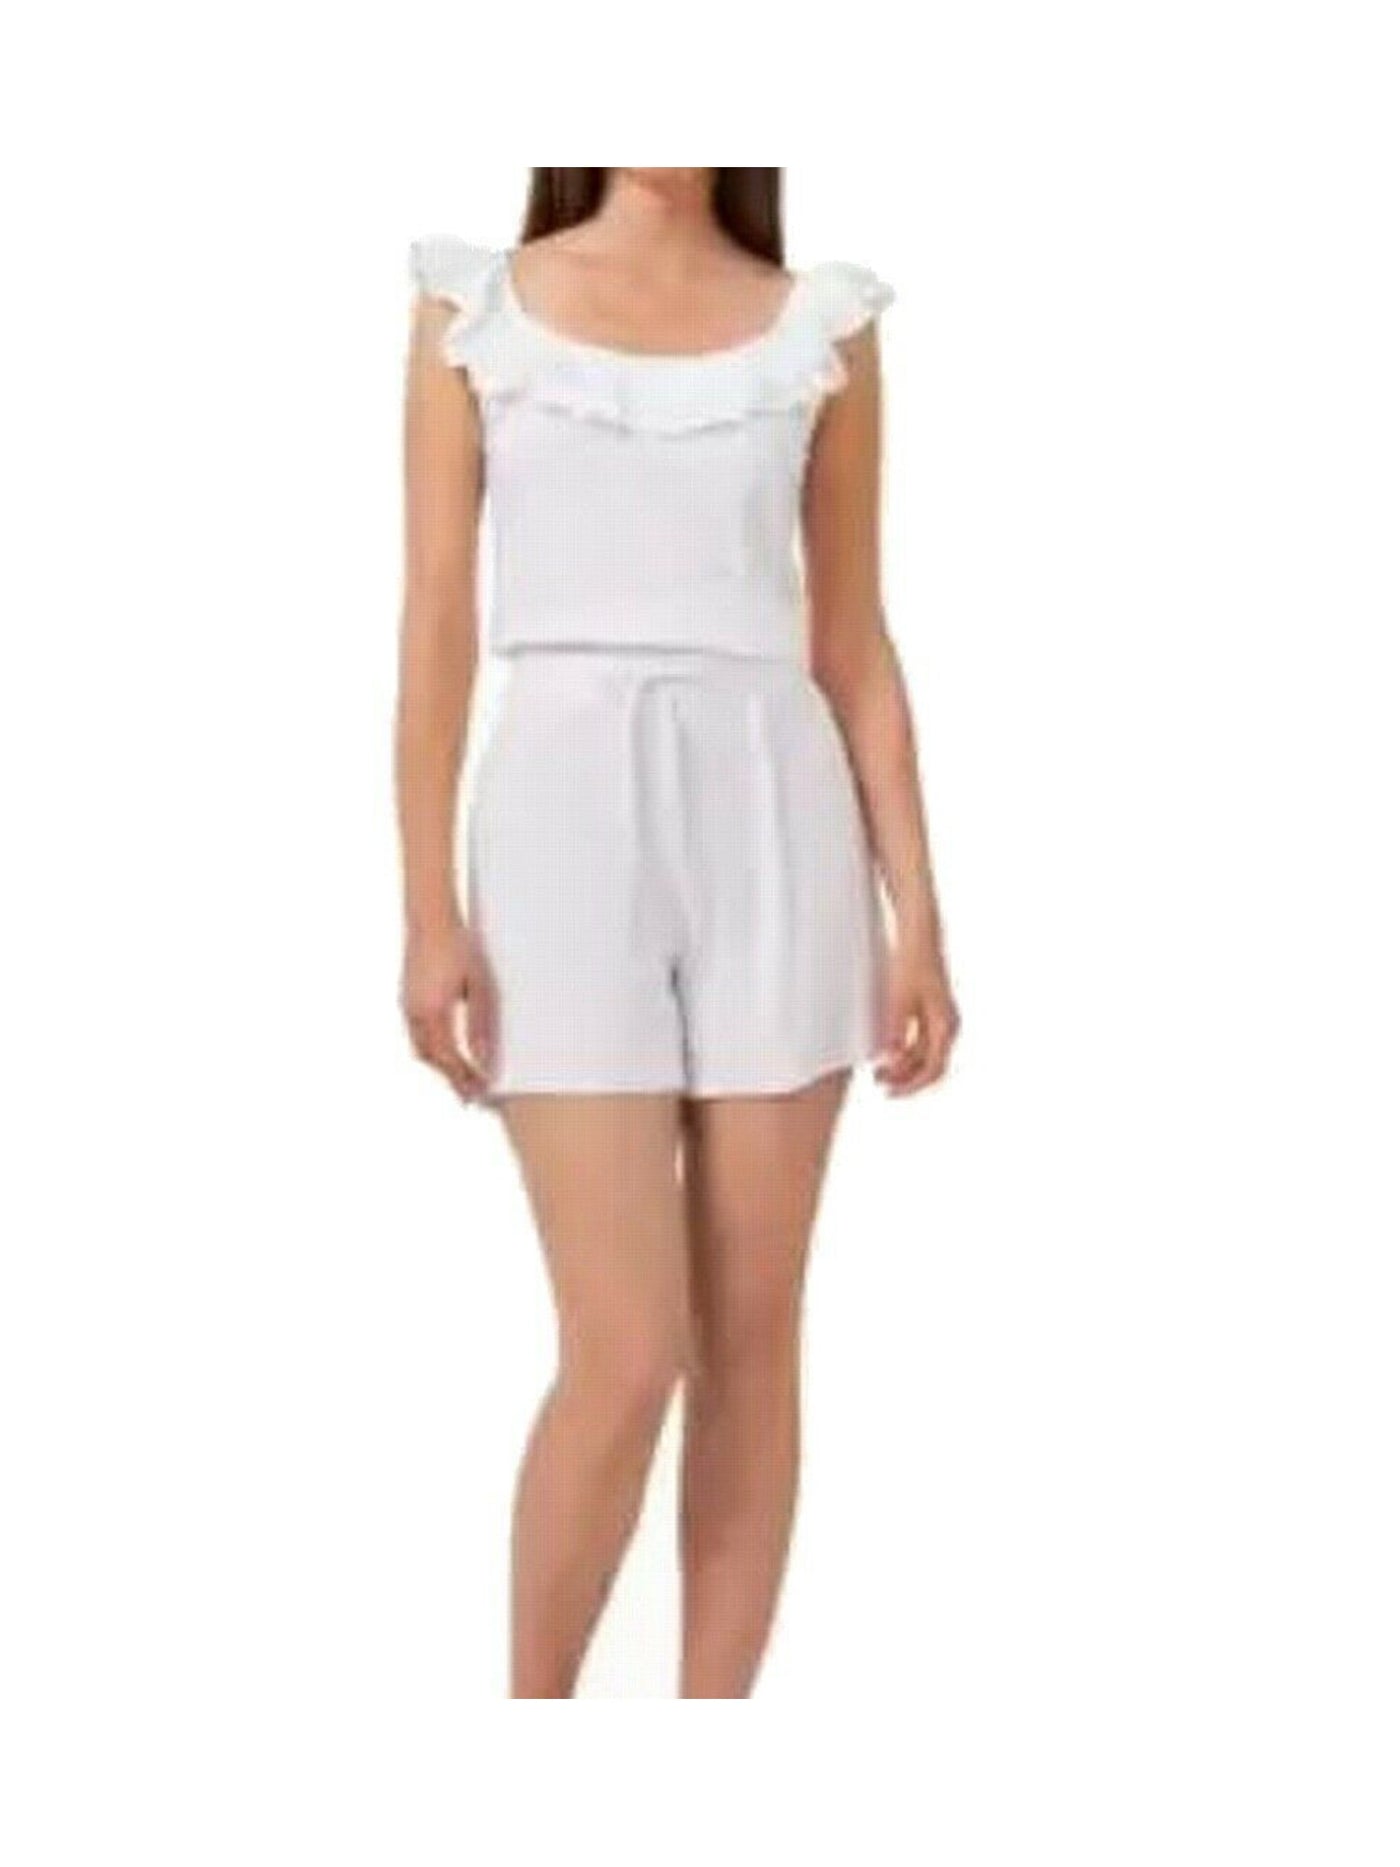 RILEY&RAE Womens White Pocketed Tie Two Front Pockets,  Relaxed Fit. Shorts S